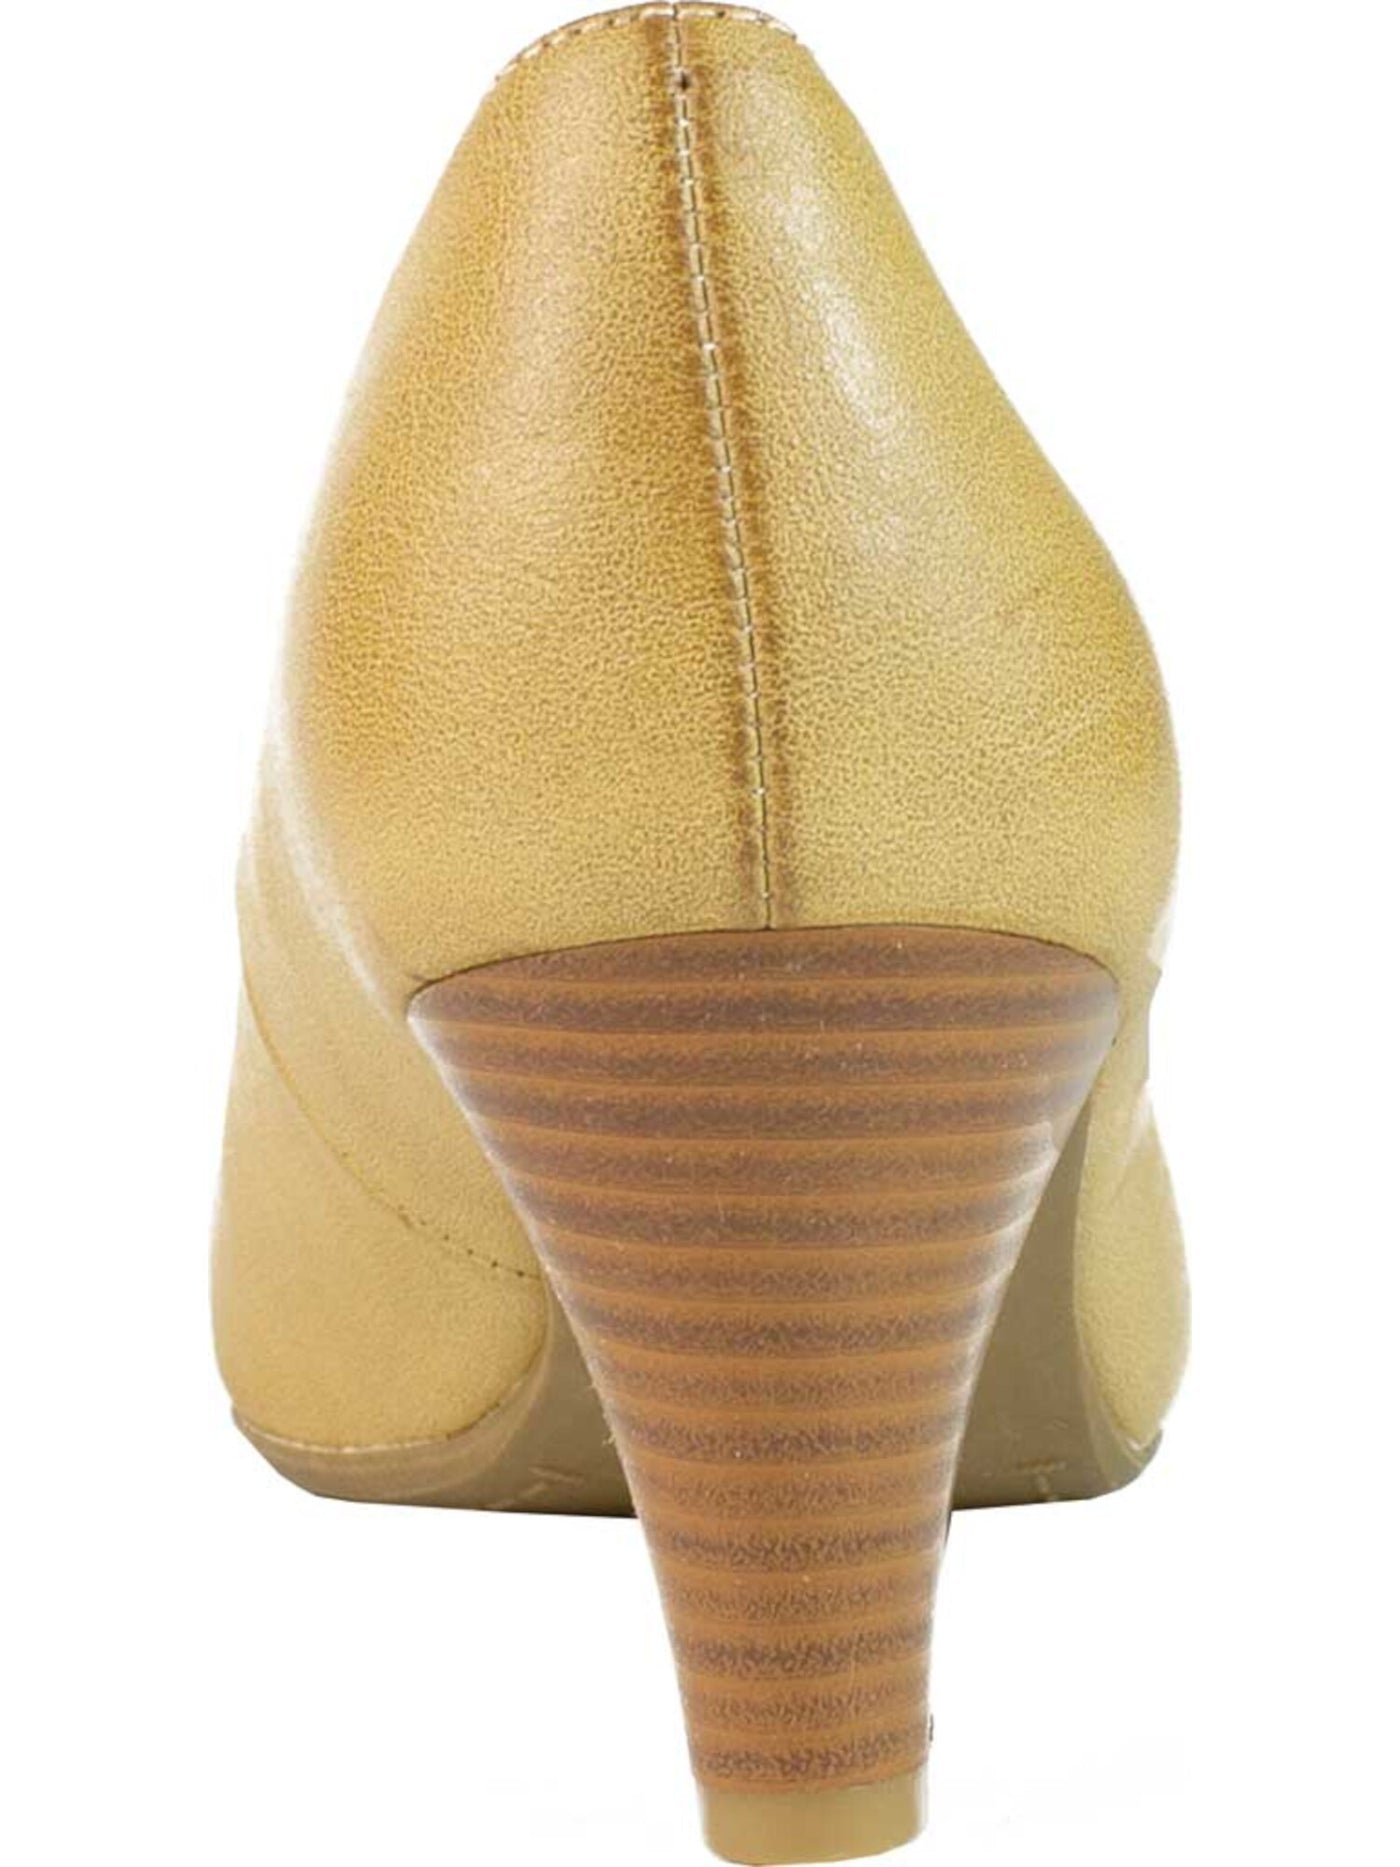 RIALTO Womens Beige Cushioned Comfort Stanford Almond Toe Stacked Heel Slip On Pumps Shoes 8.5